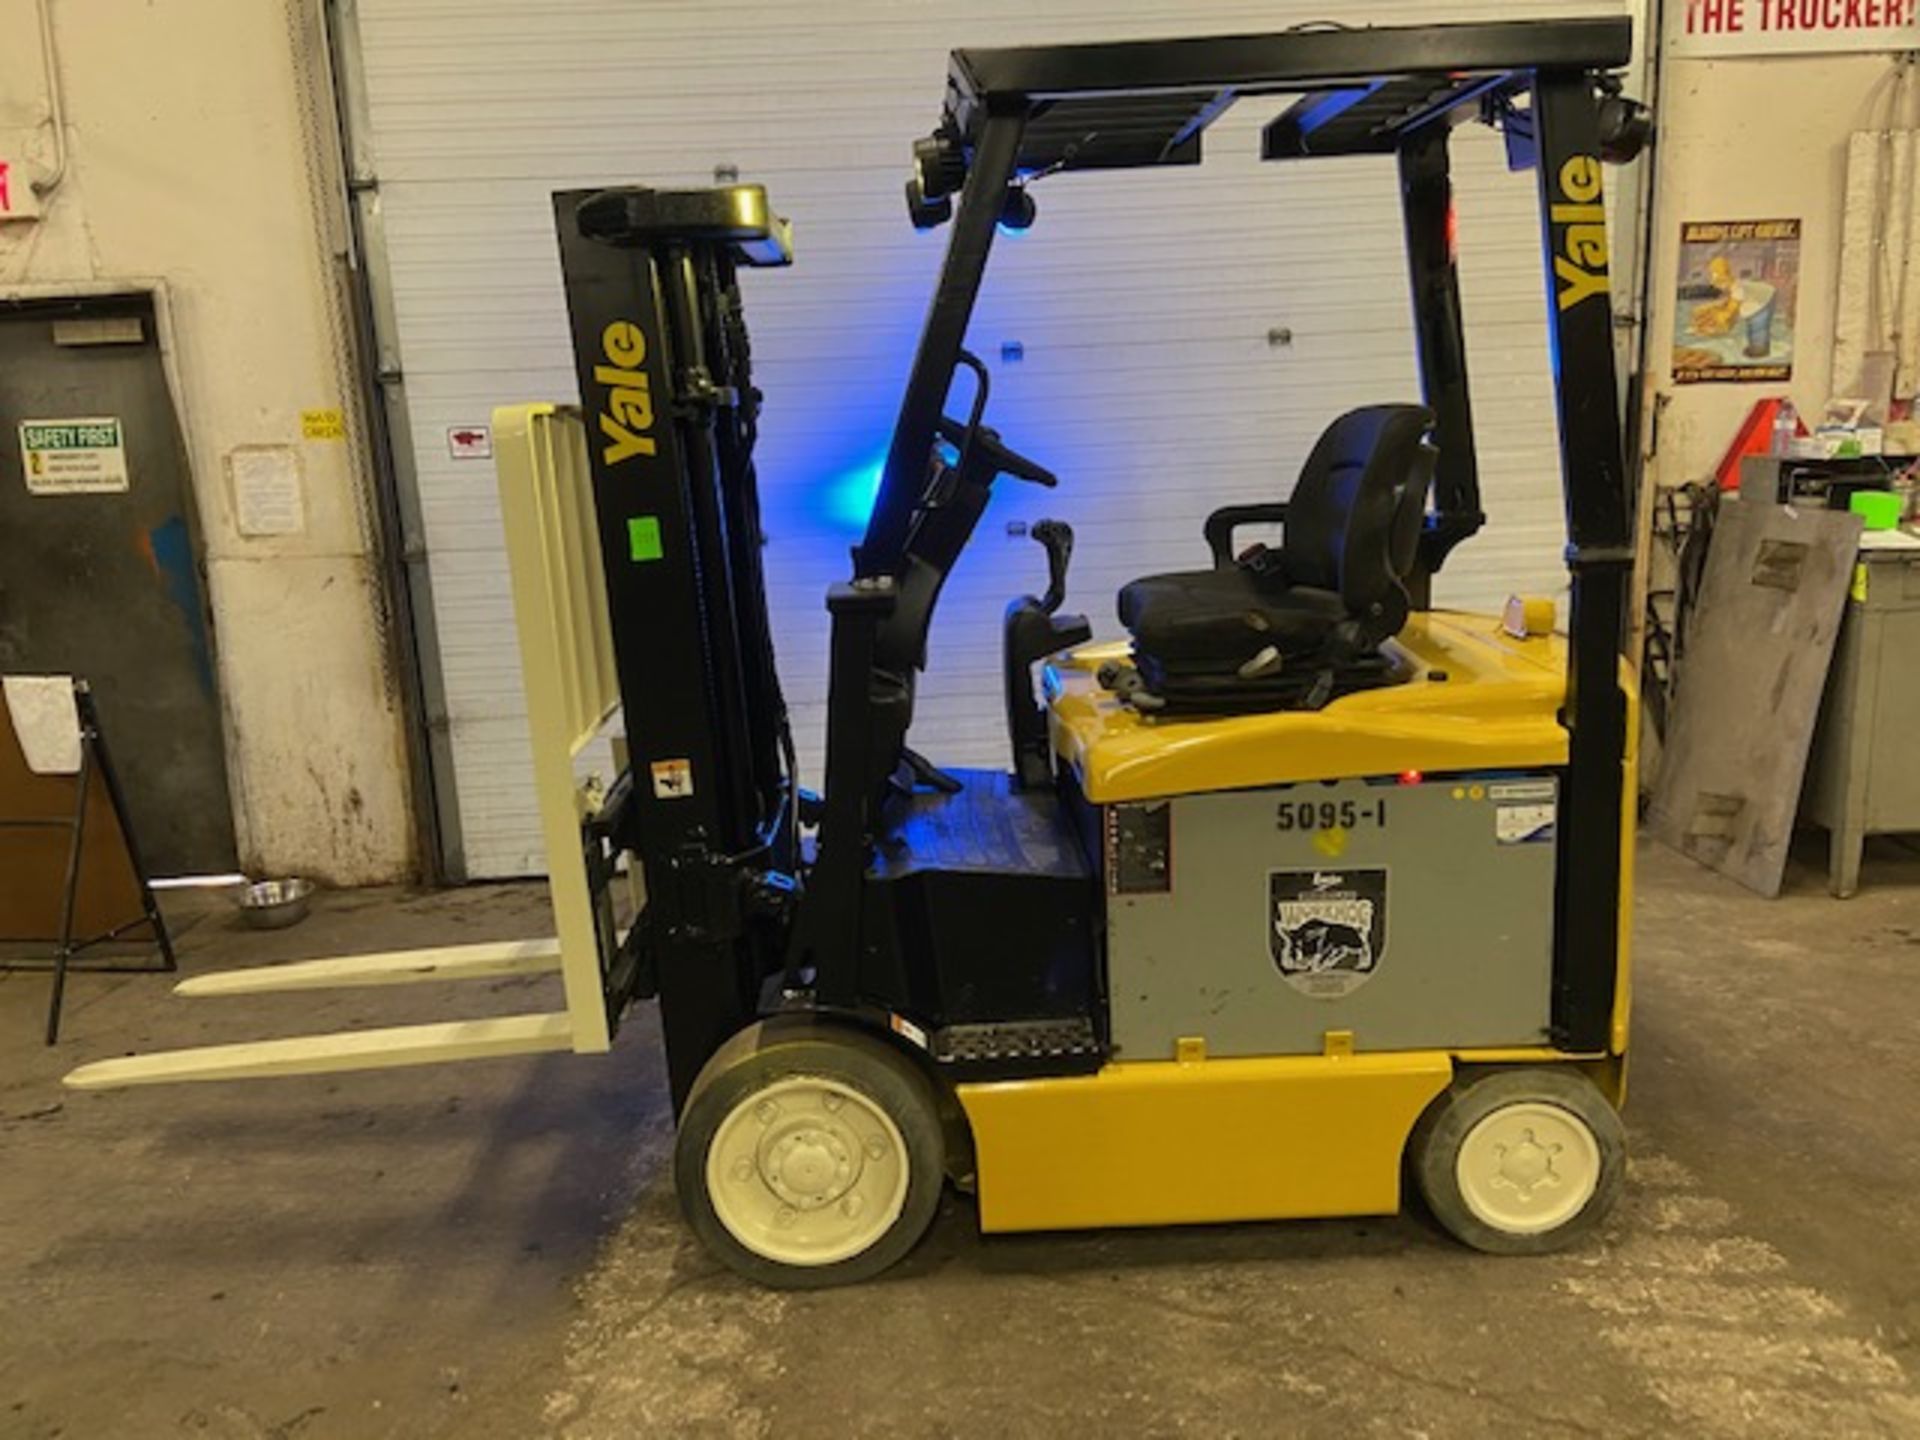 FREE CUSTOMS - 2009 Yale 5000lbs Capacity Forklift Electric with 3-STAGE MAST with sideshift